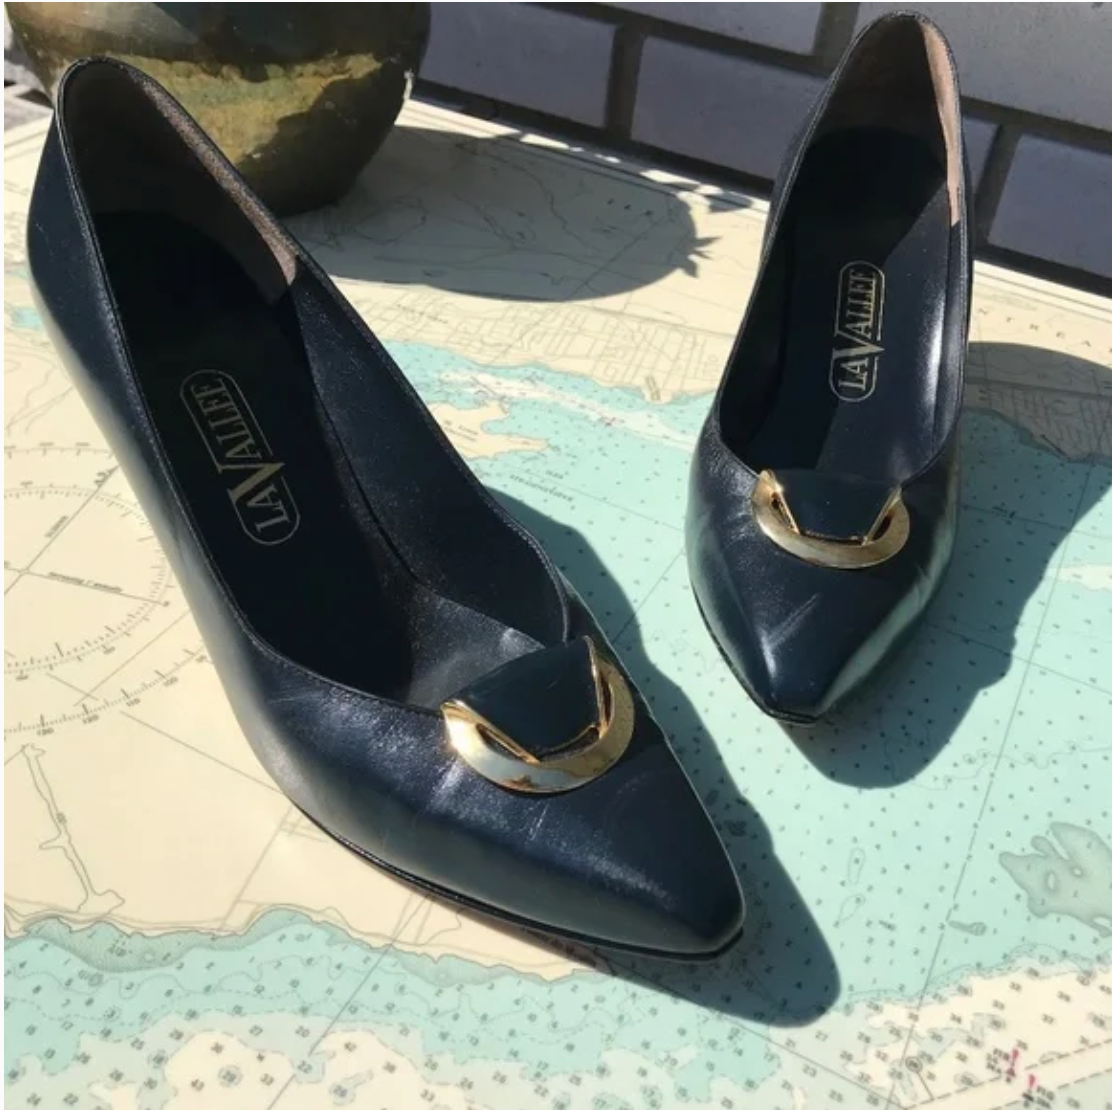 Vintage LaVallee Navy and Gold Leather Pumps